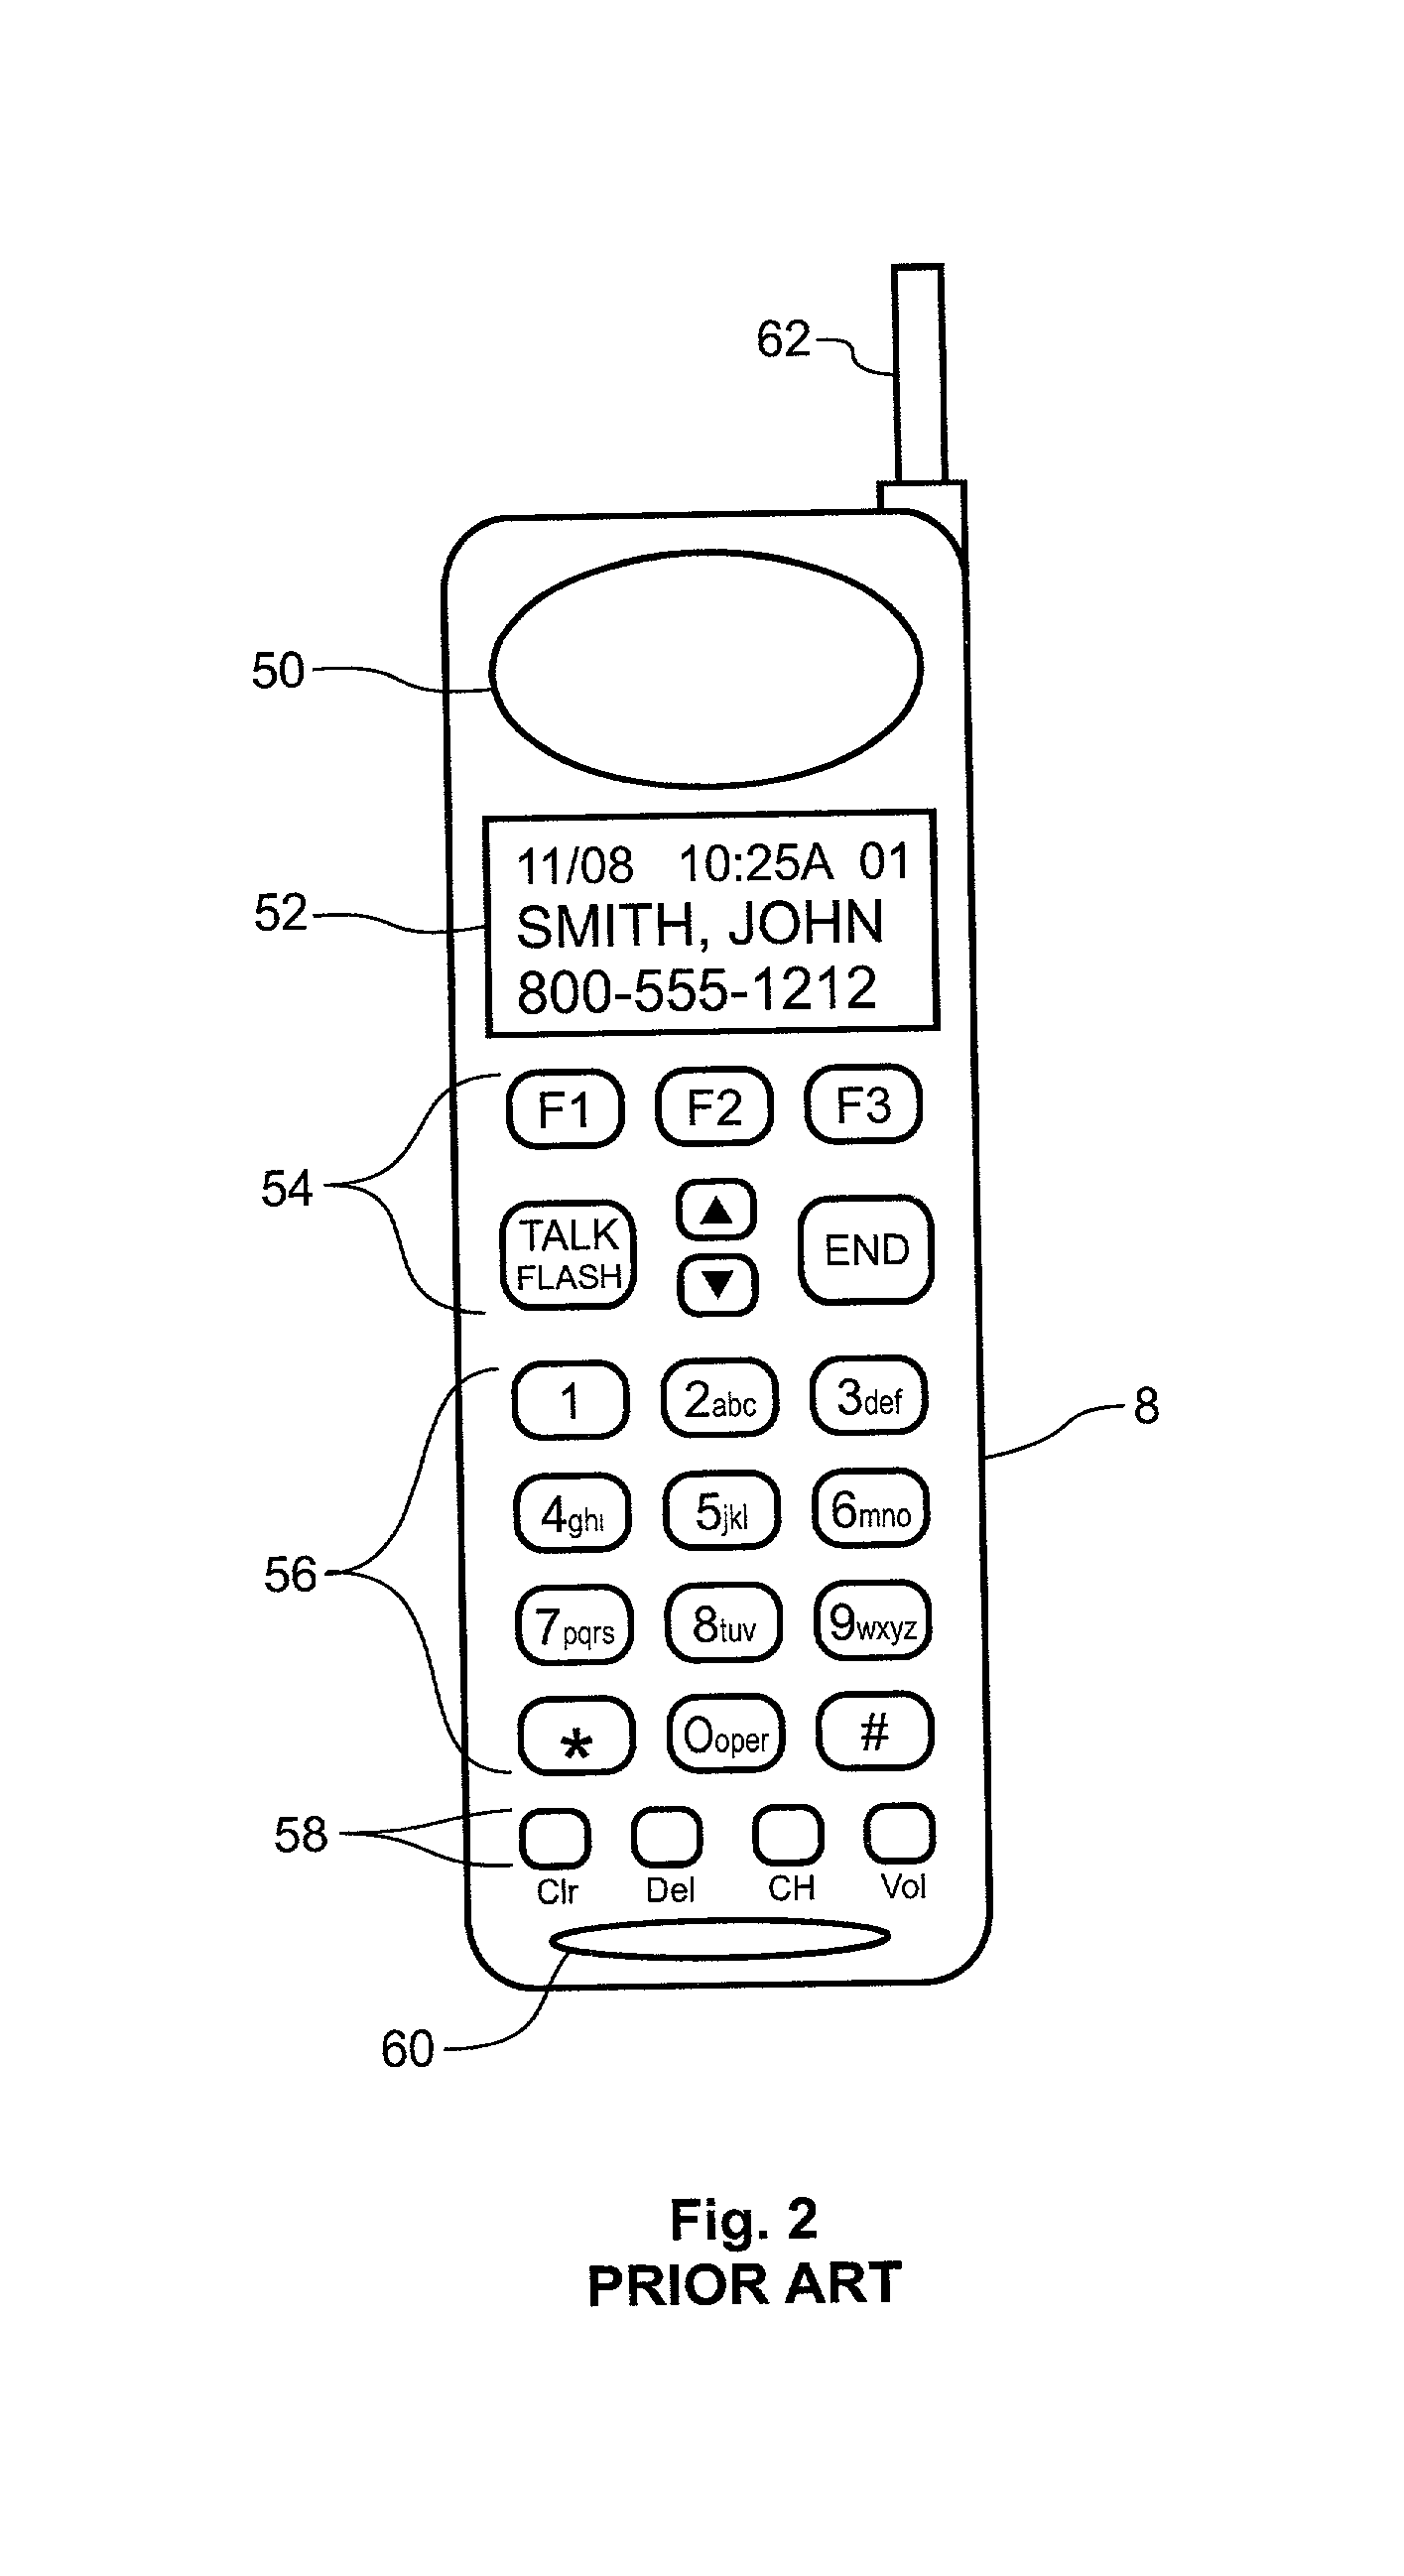 Wireless docking station system and method for a multiple handset cordless telephone system